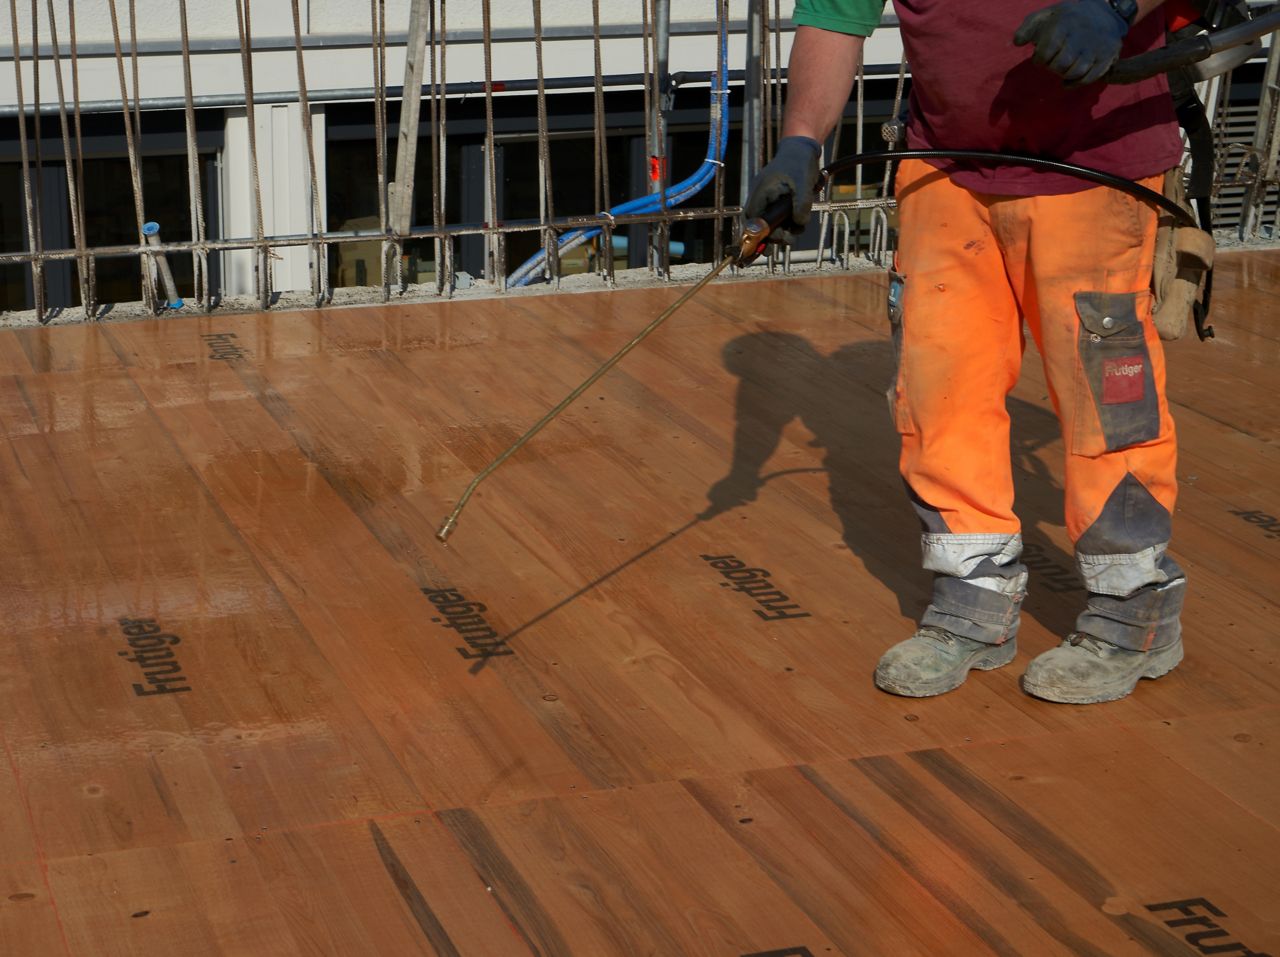              Man spraying Sika® Separol® formwork release agent on wood on construction site                  